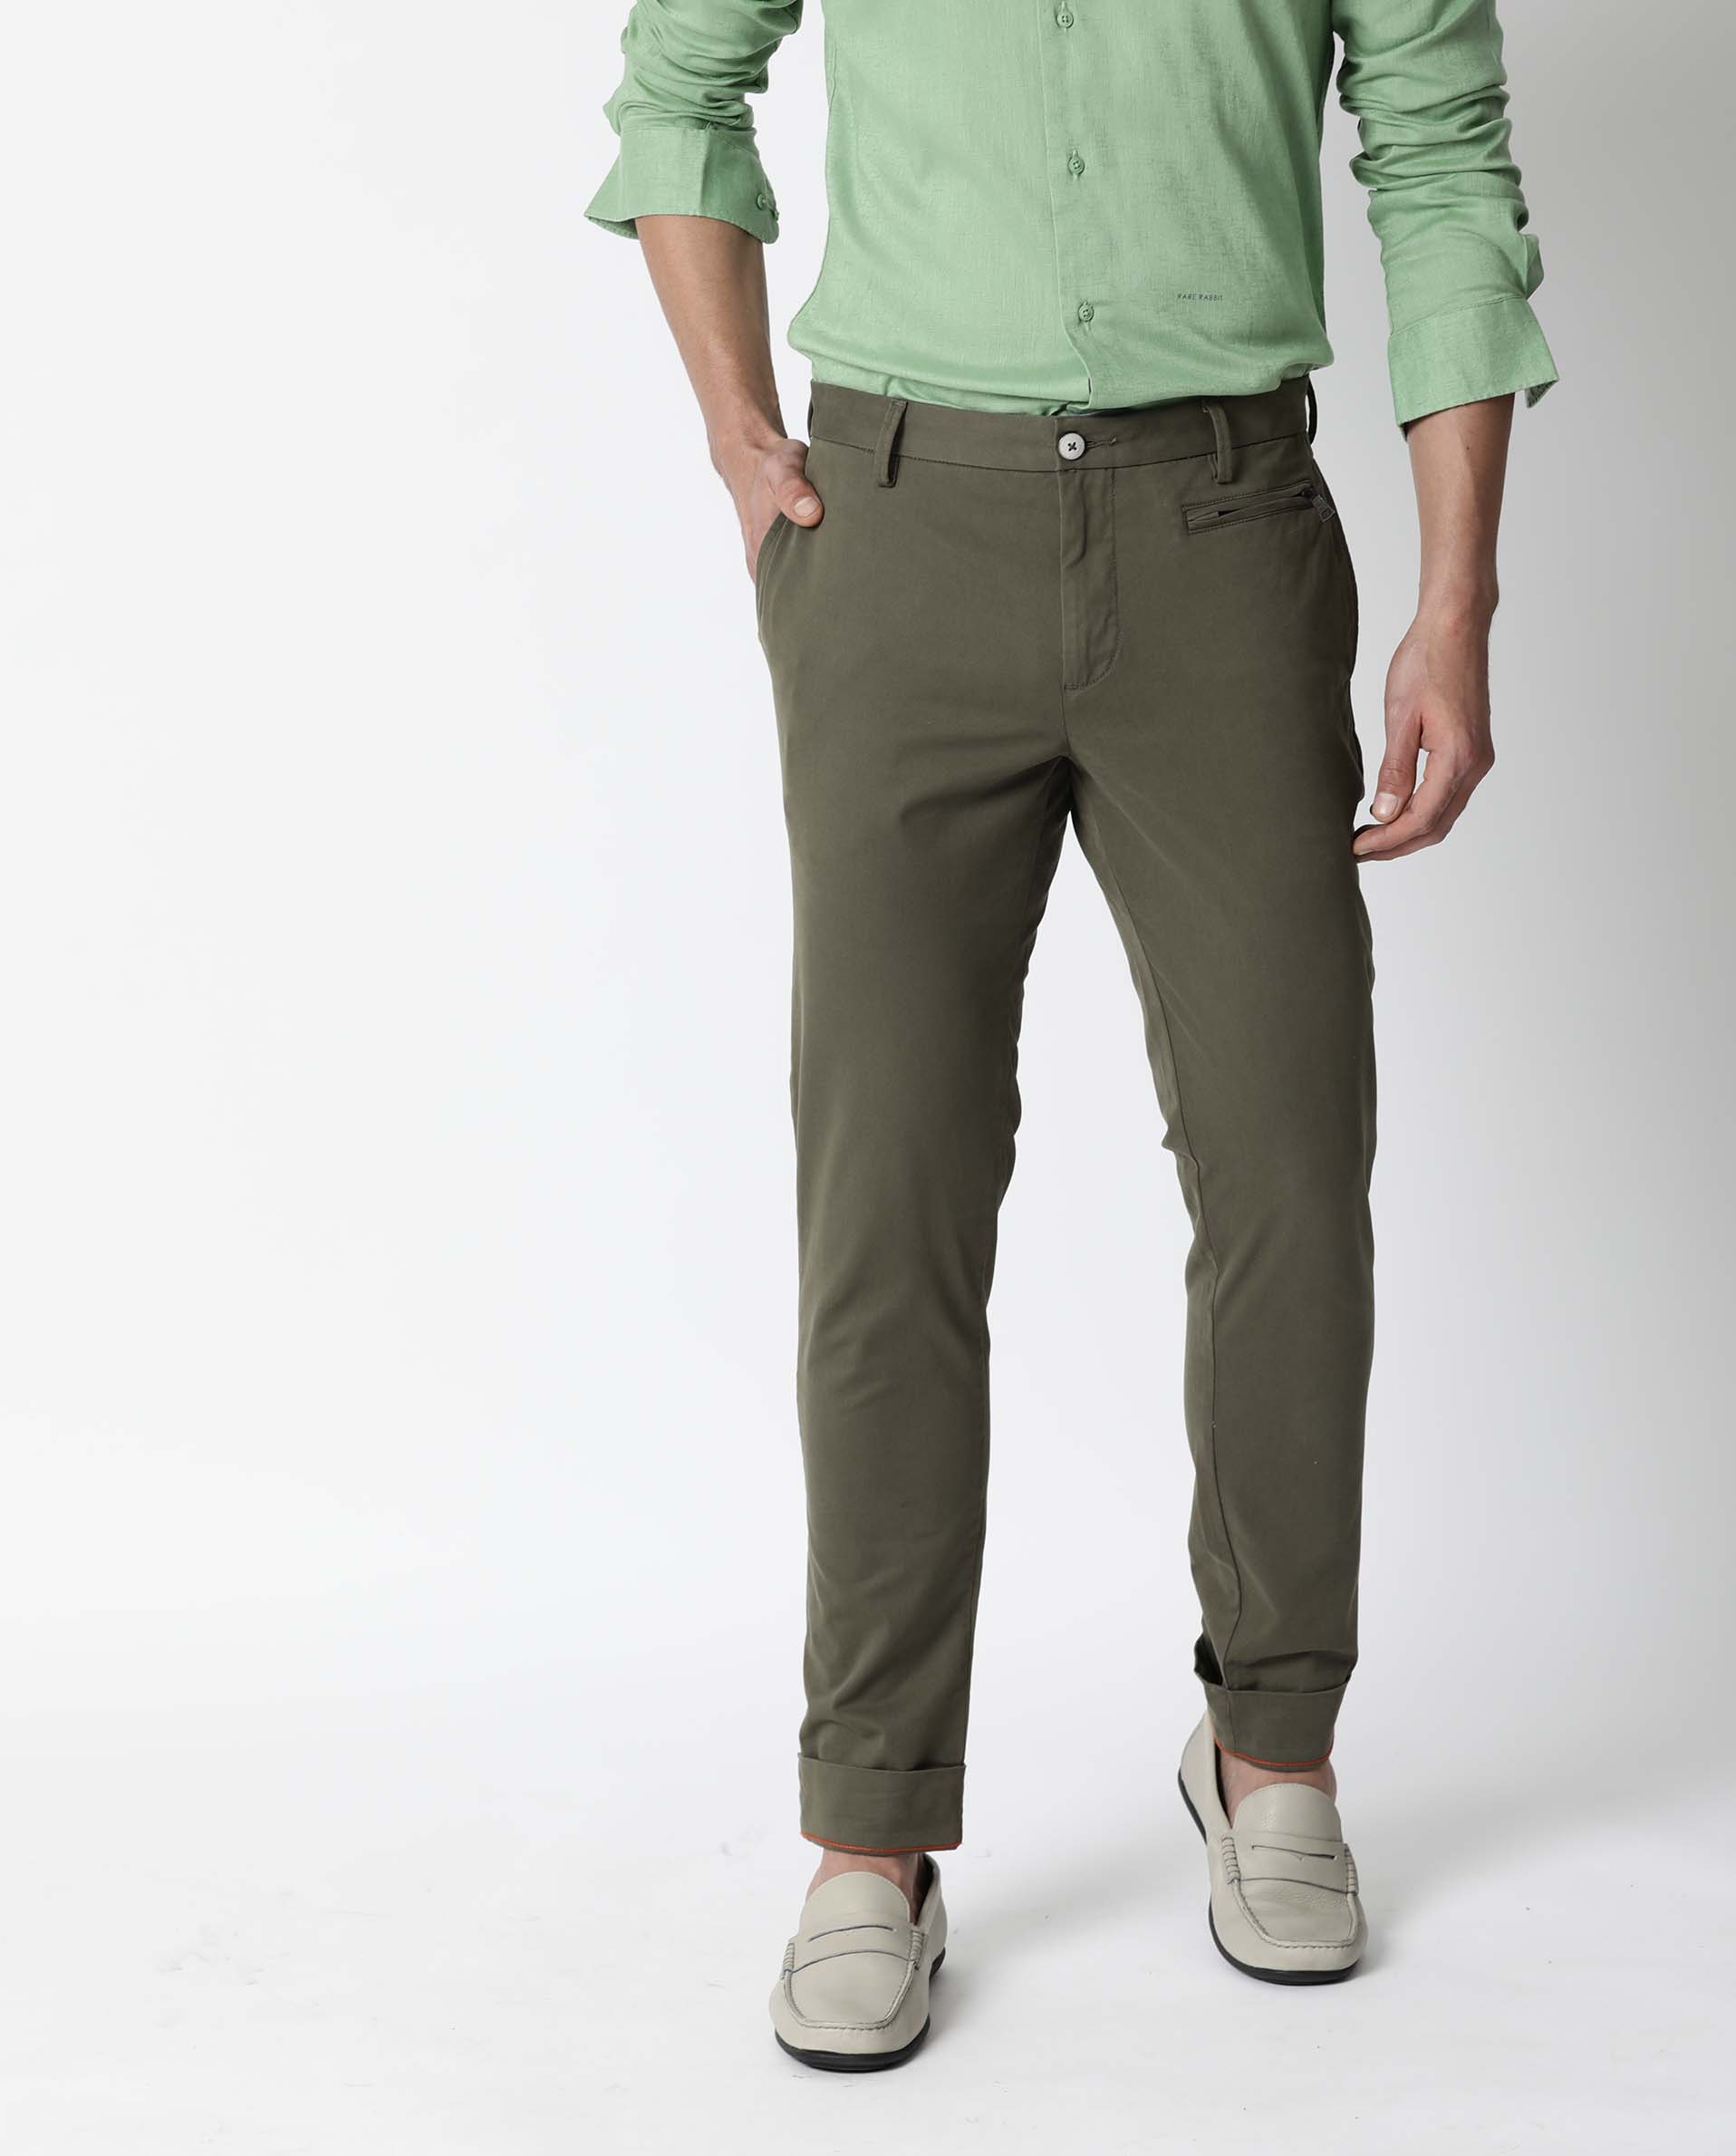 Polo Shirt Trousers Summer Outfit Combinations  Best Fashion Blog For Men   TheUnstitchdcom